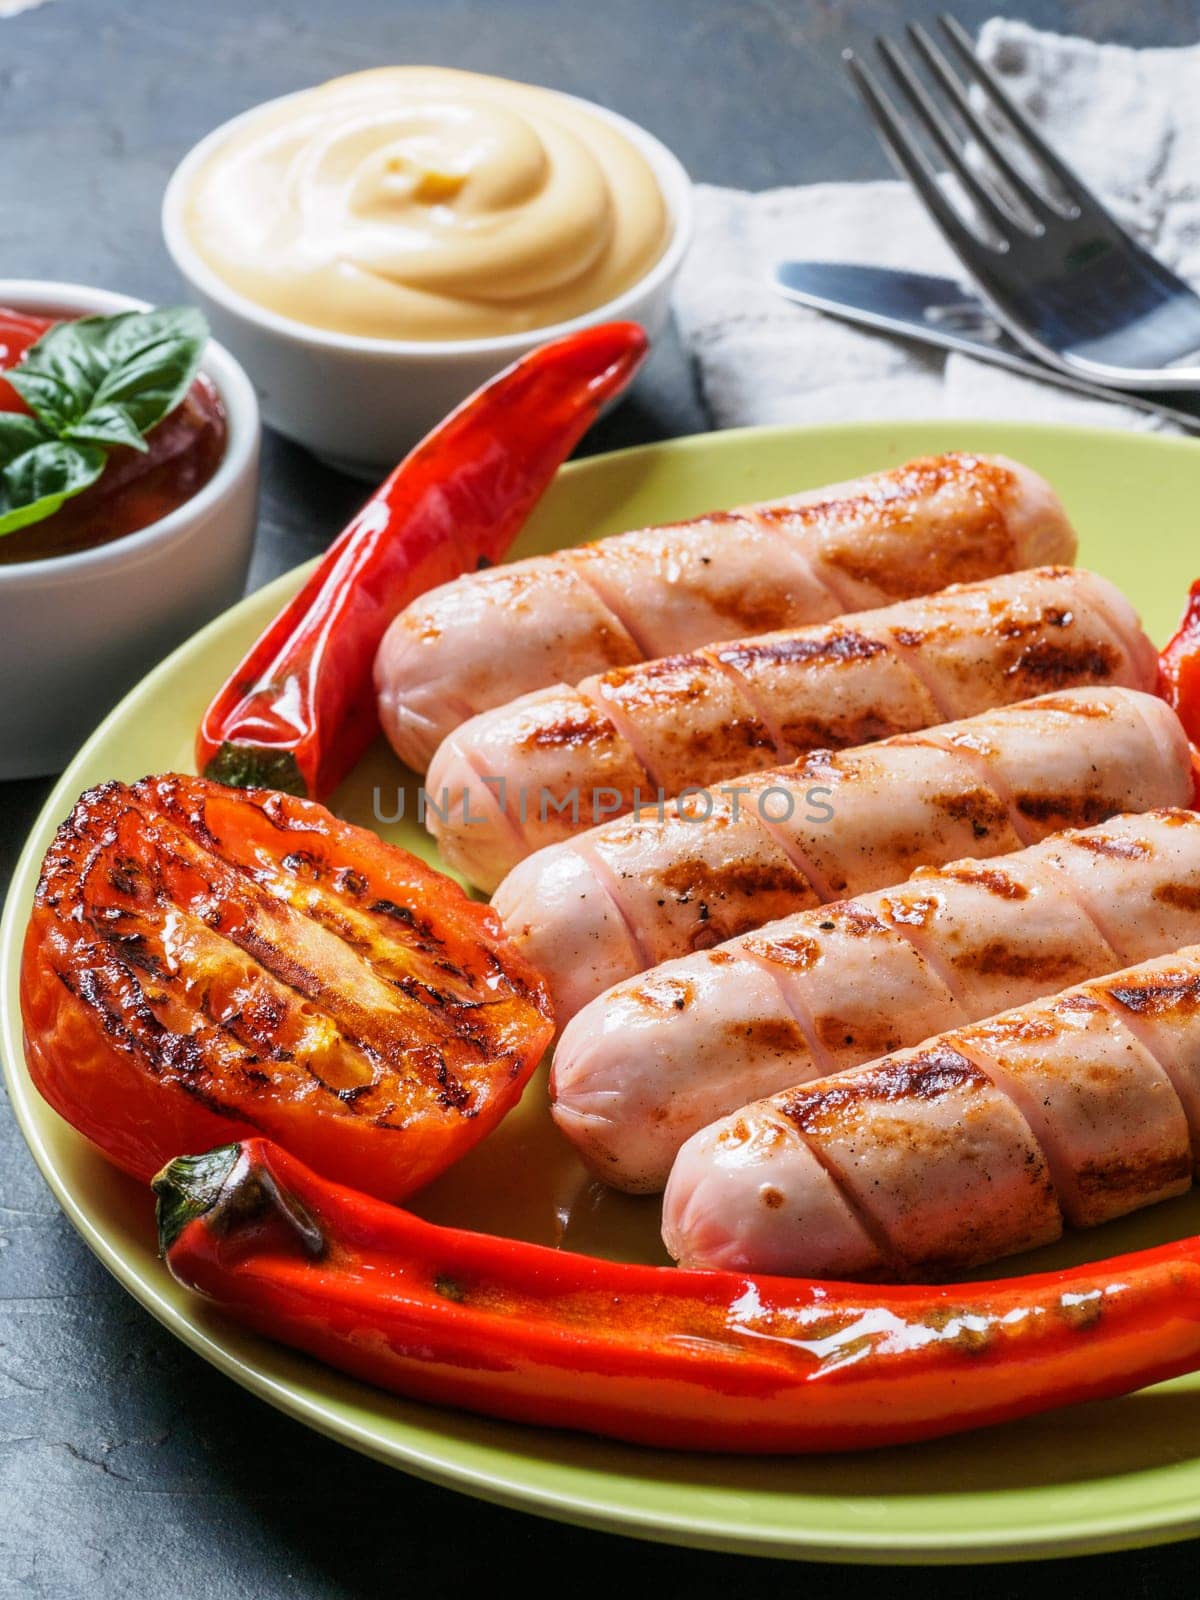 Close up view of chicken homemade sausages with sauces ketchup and mustard. Grilled sausages and grilled vegetables in green plate. Copy space. Vertical.